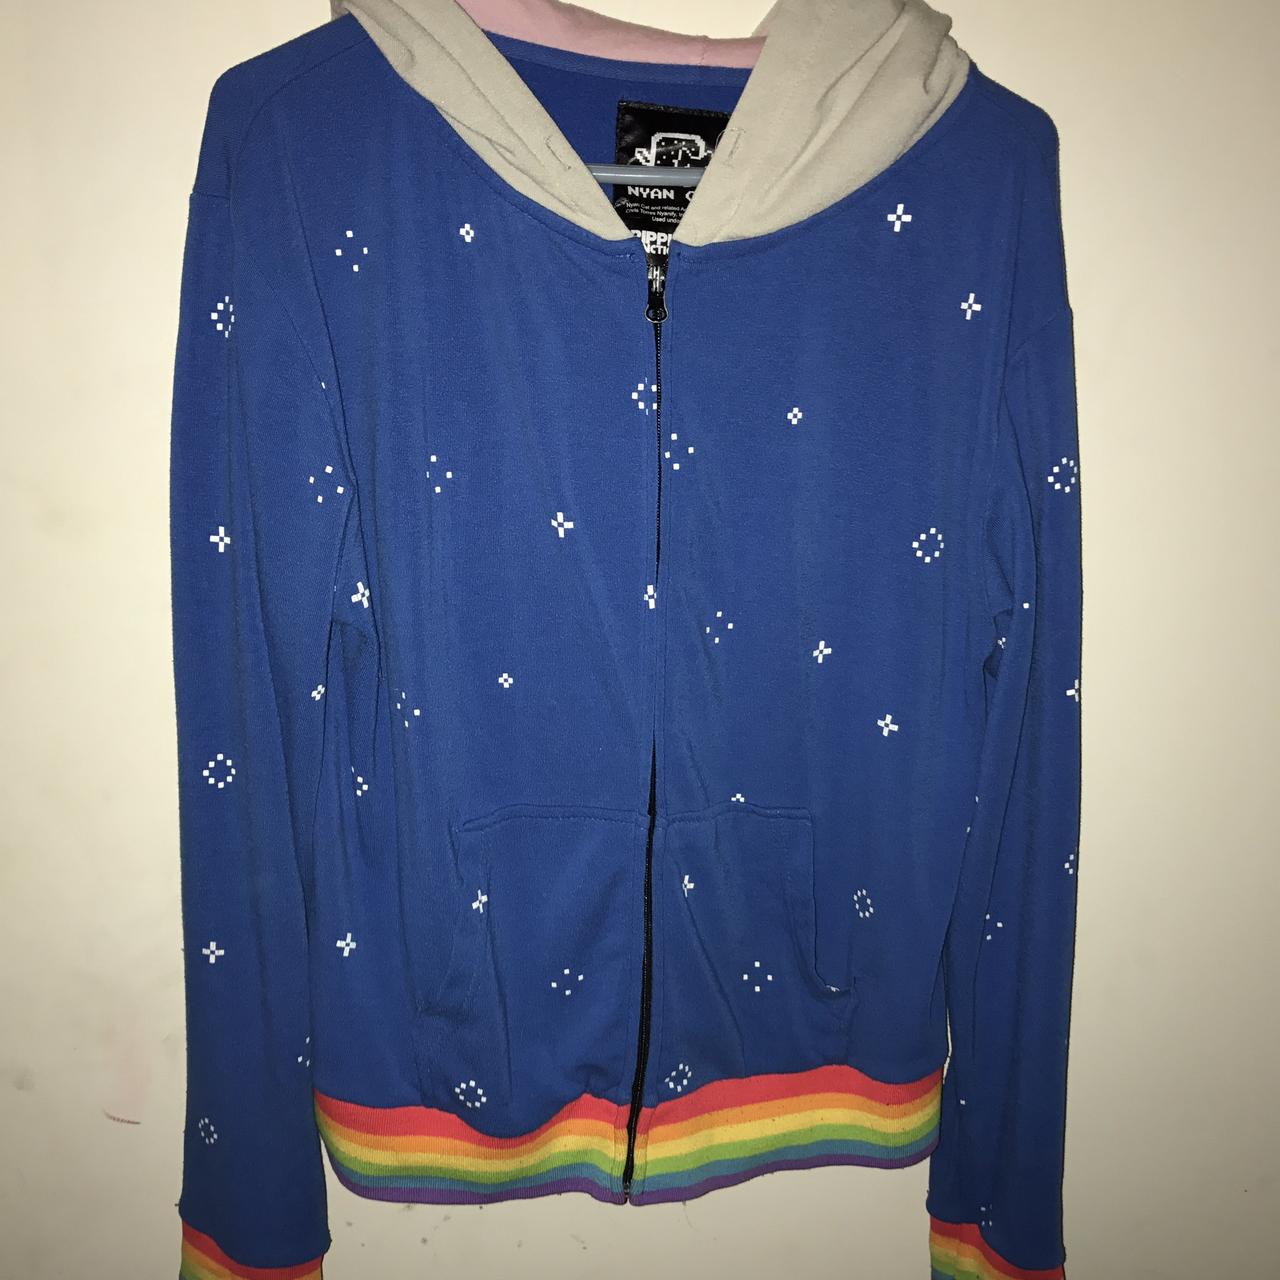 Nyan cat hoodie; old but in good condition - Depop